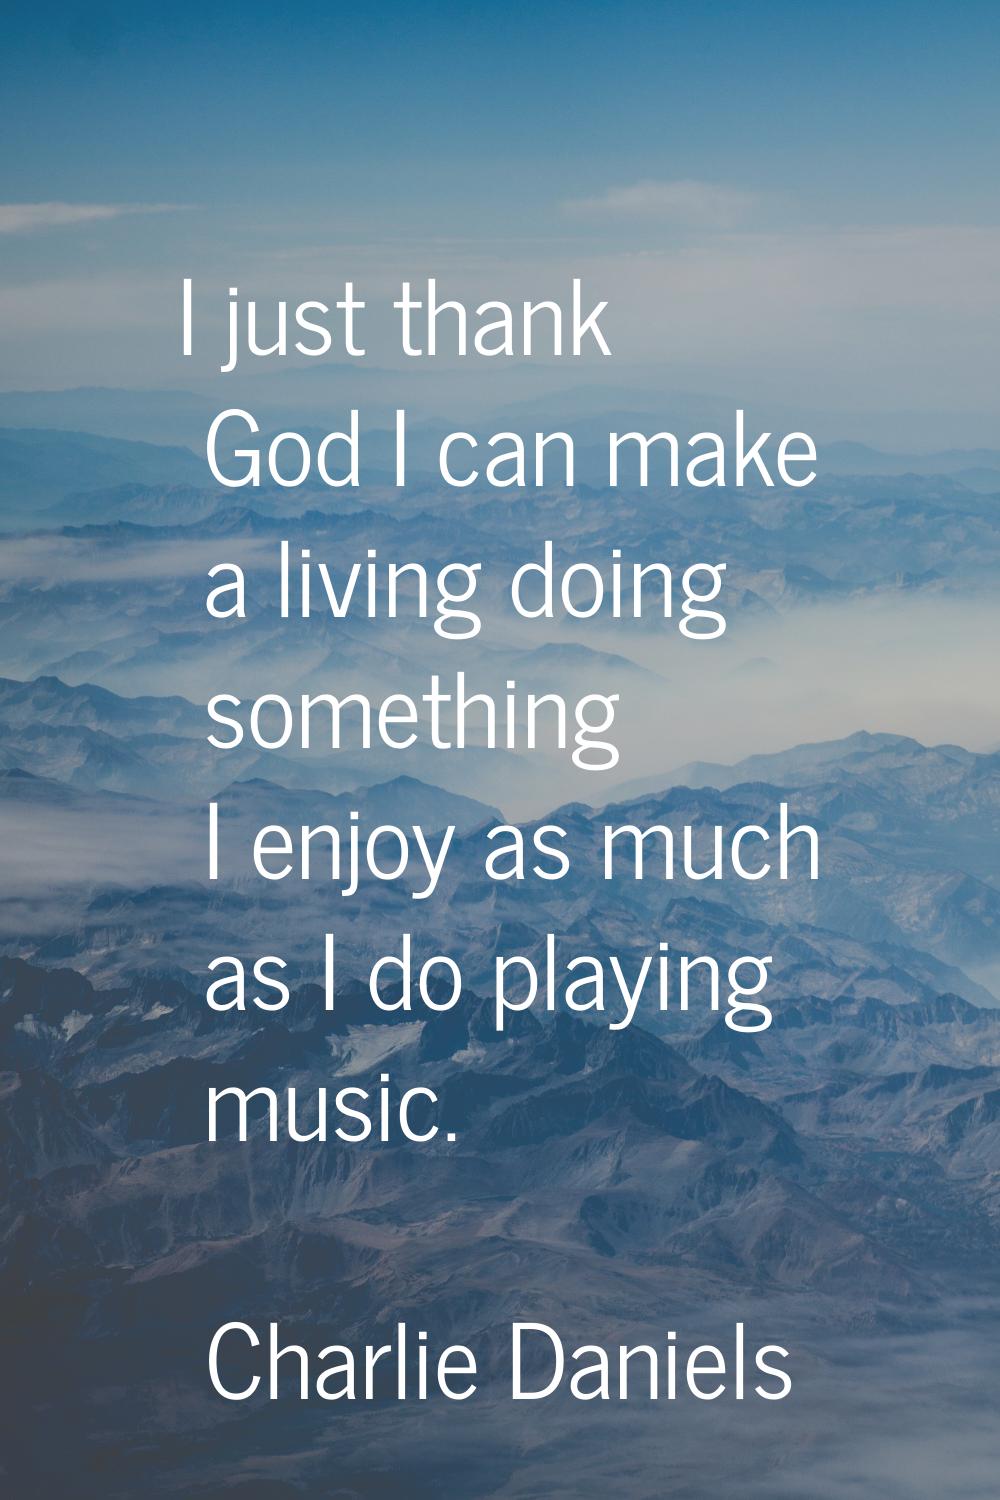 I just thank God I can make a living doing something I enjoy as much as I do playing music.